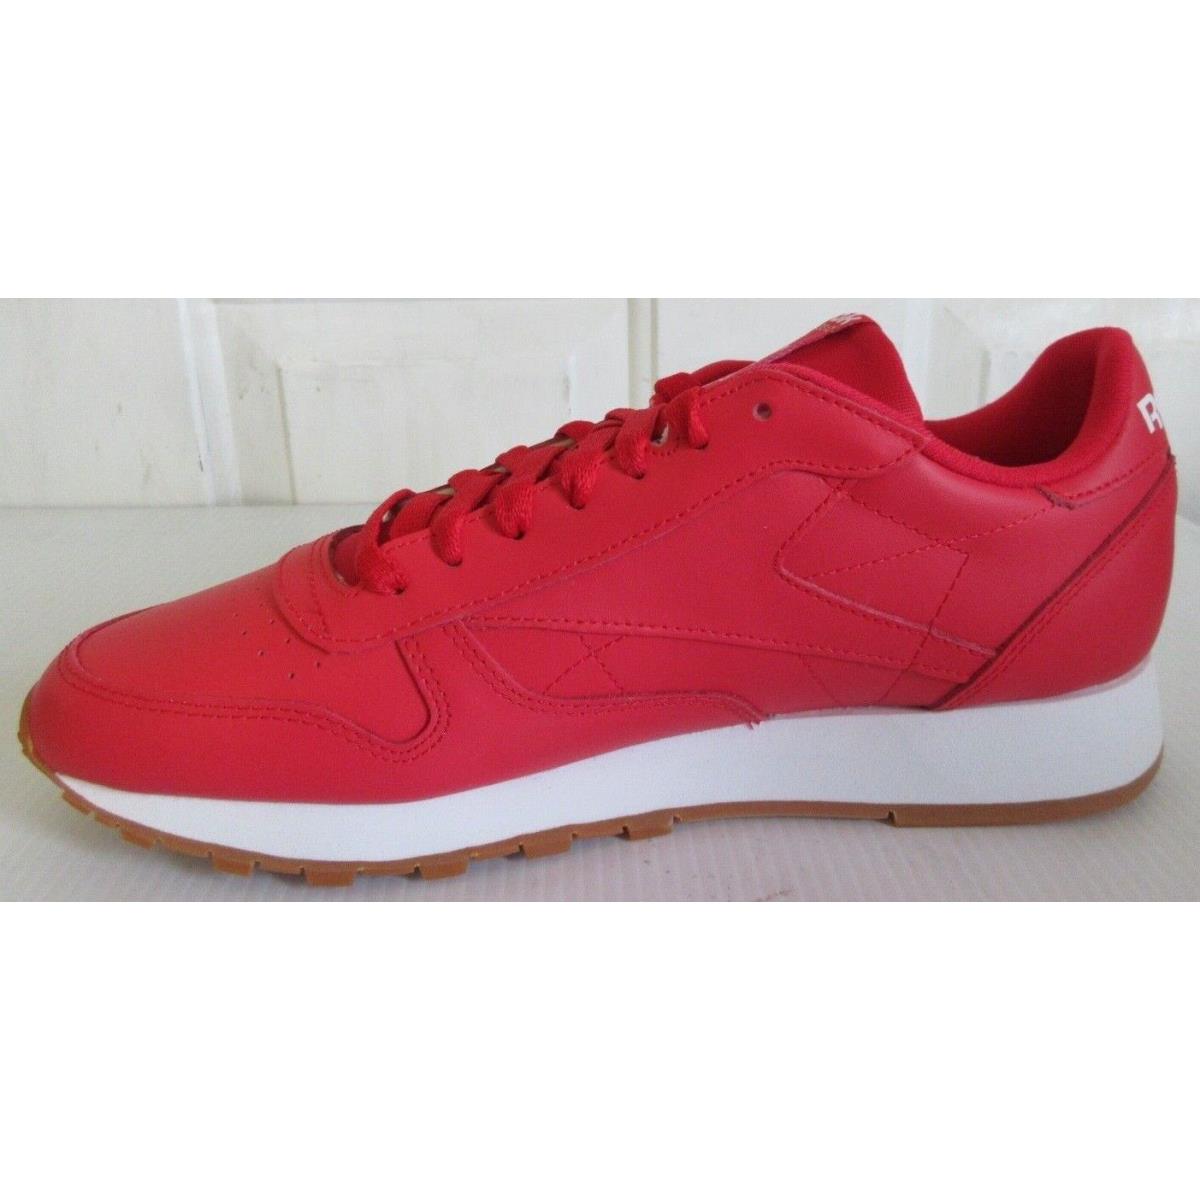 Reebok shoes Classic Leather - Red 0